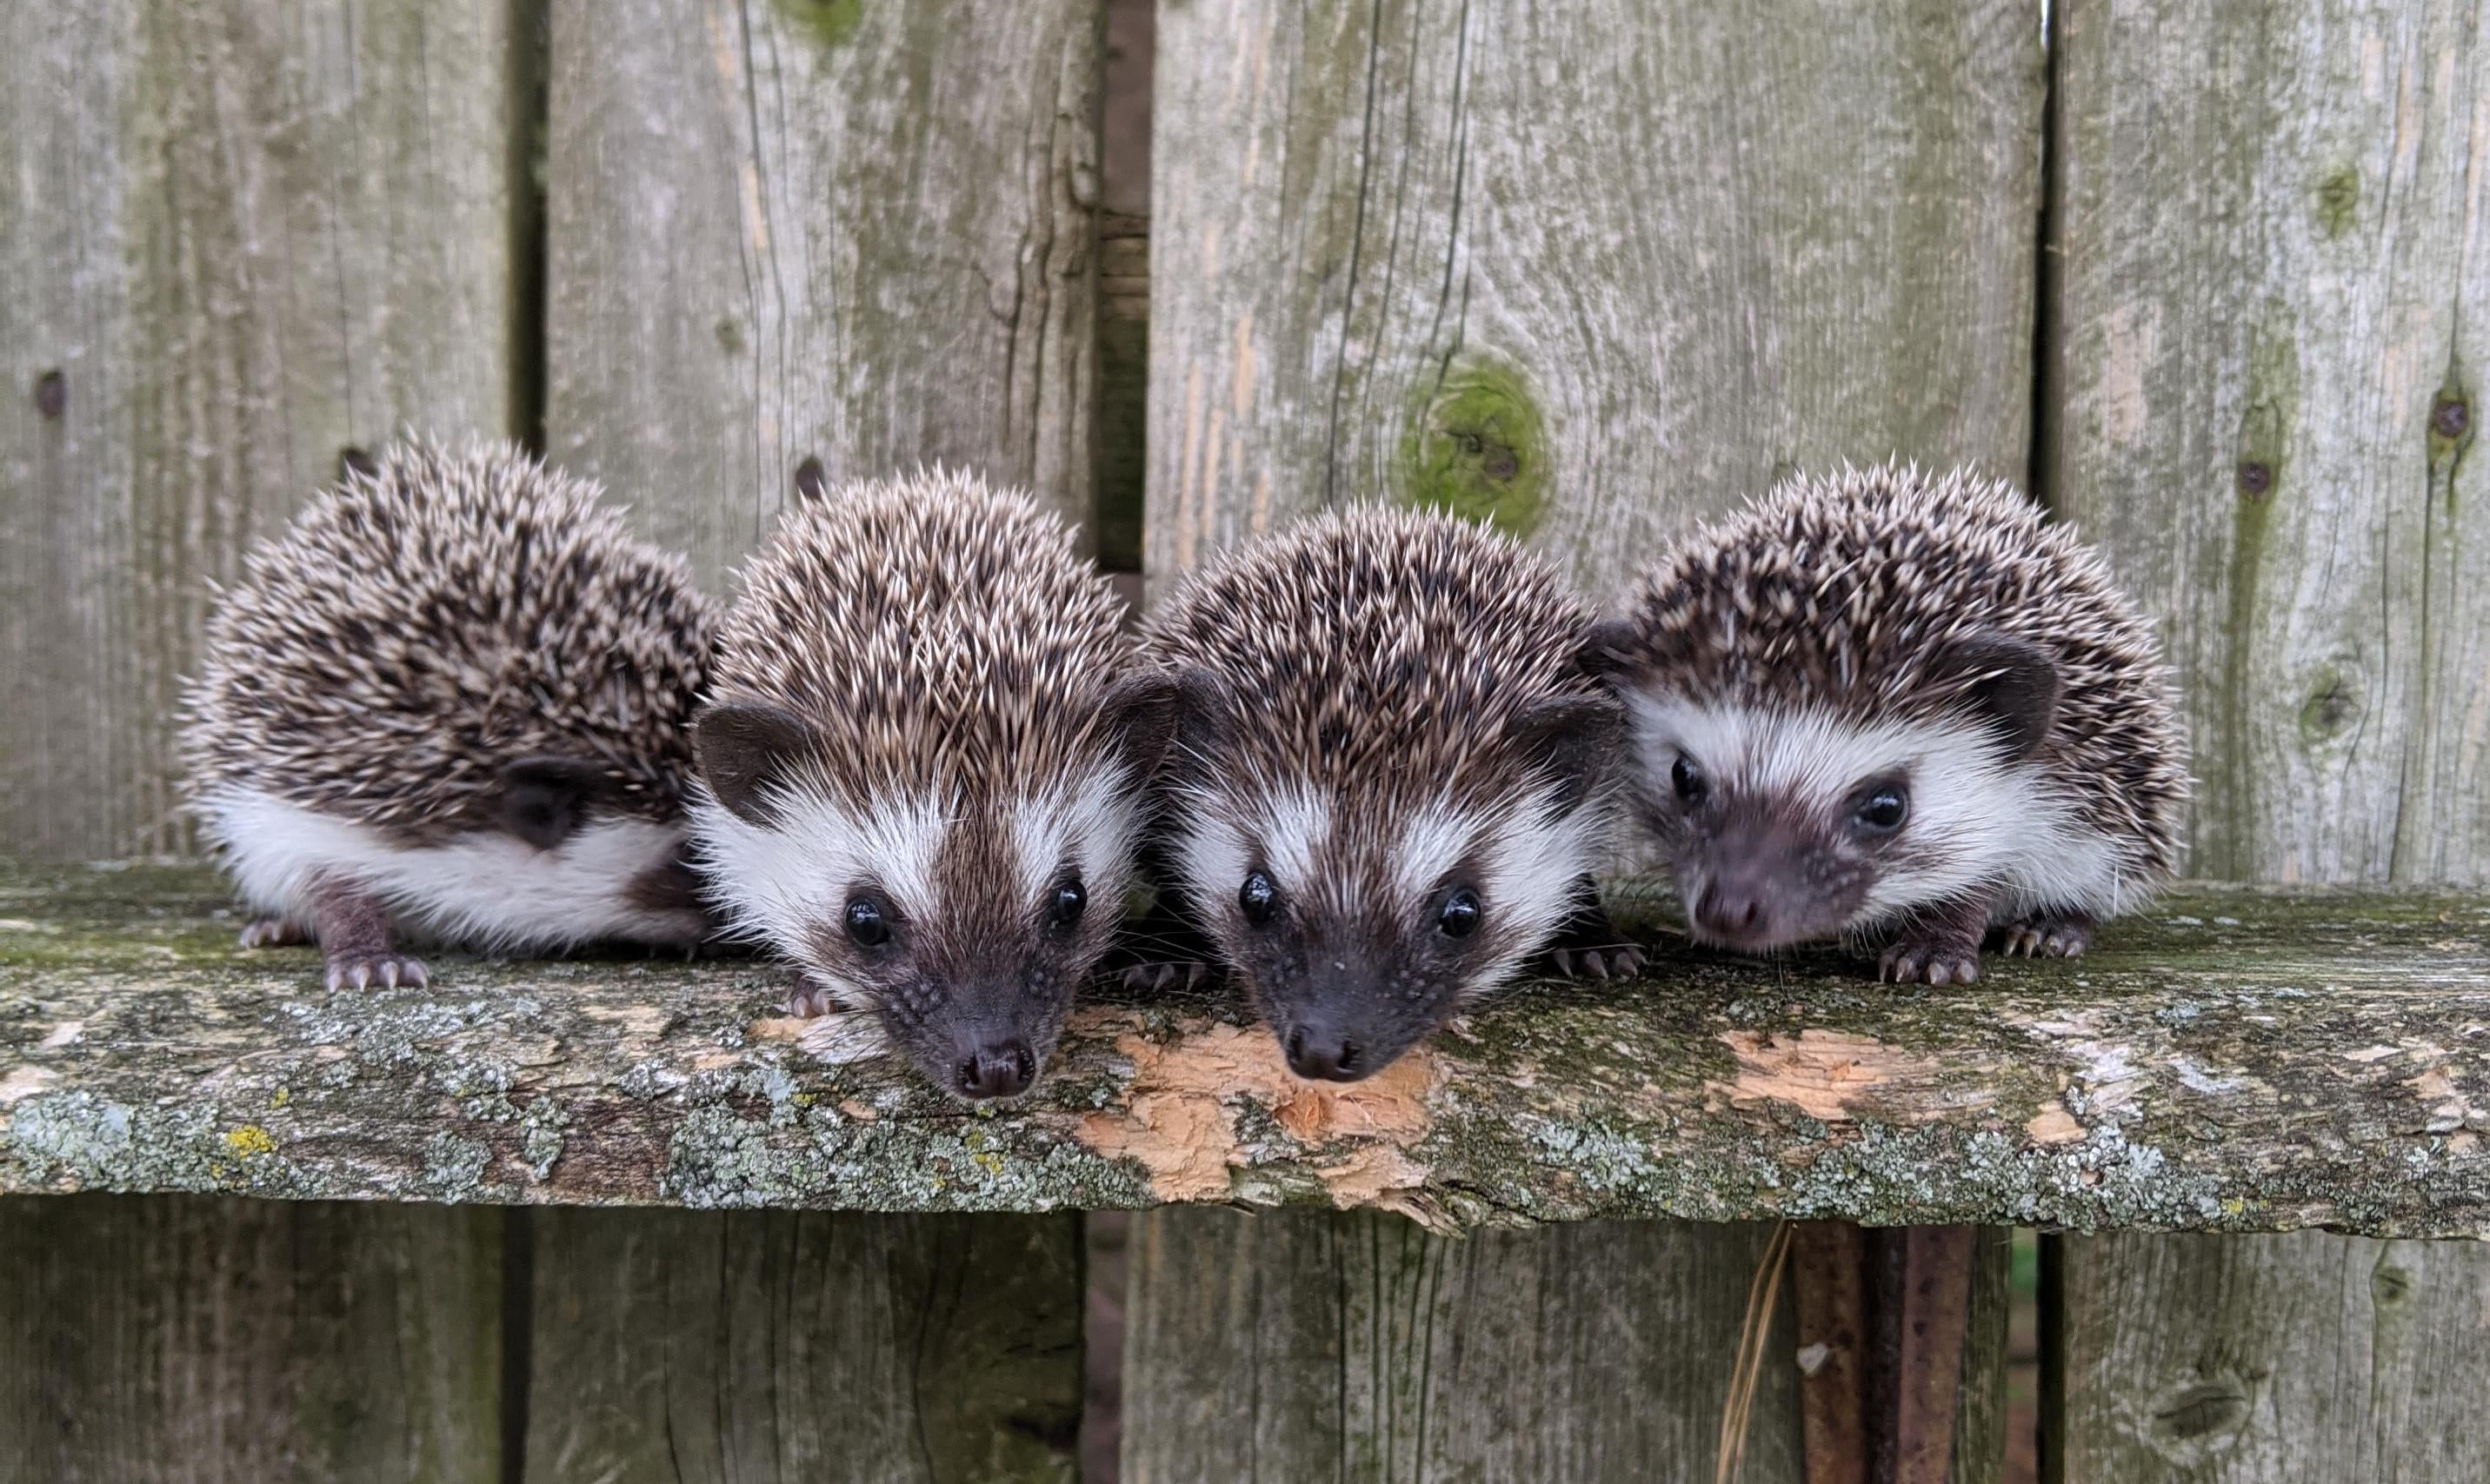 What do you call a group of hedgehogs?